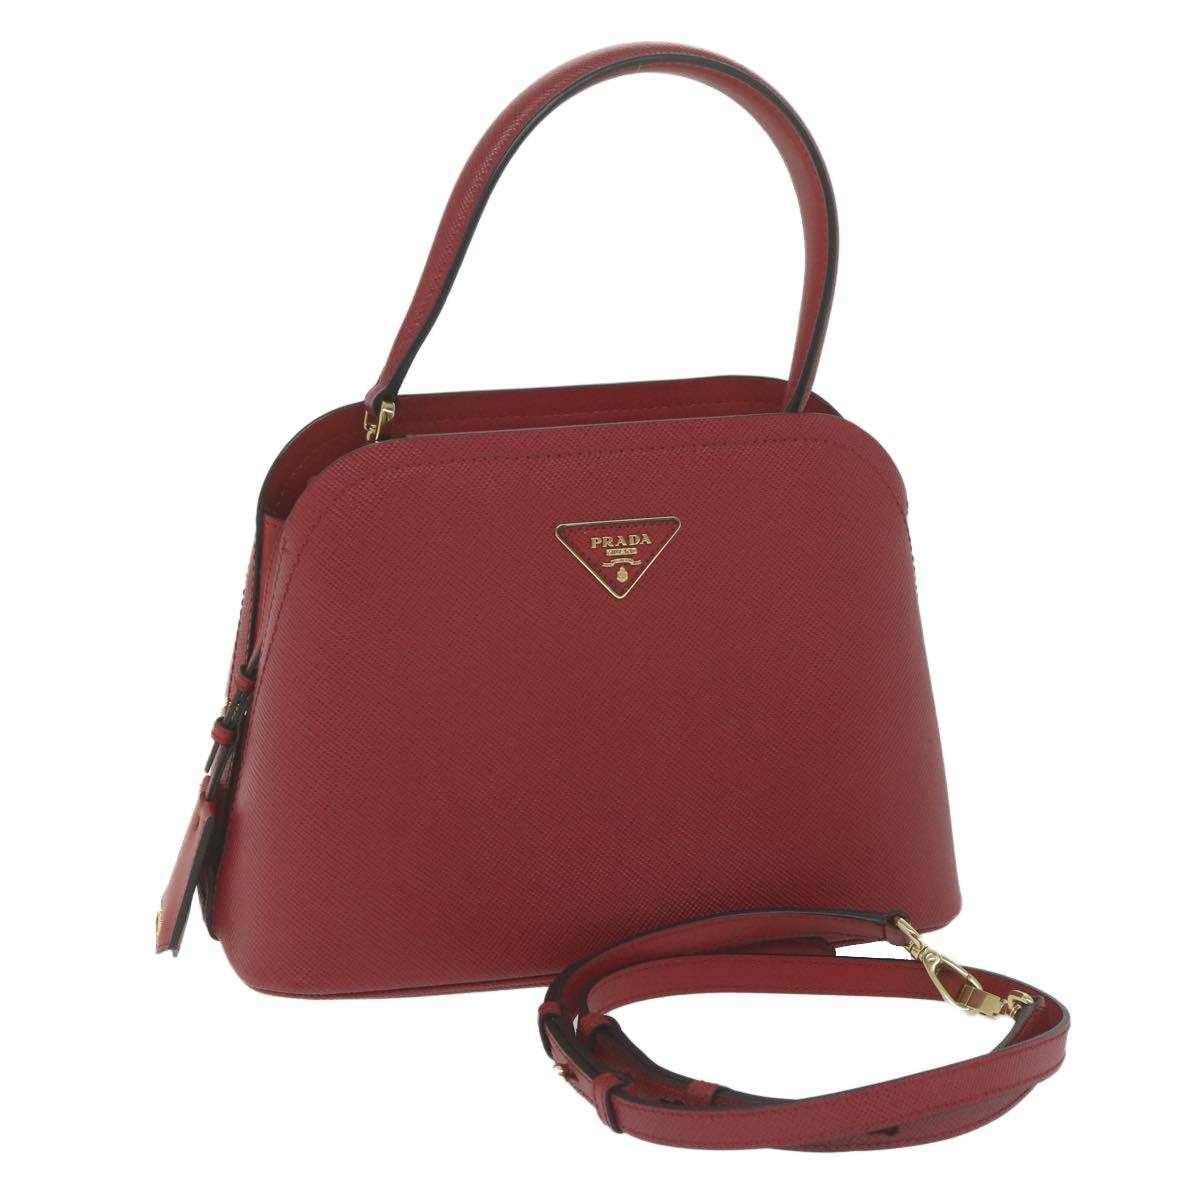 Prada Women's Luxurious Red Leather Hand Bag with Textured Finish by Prada in Red